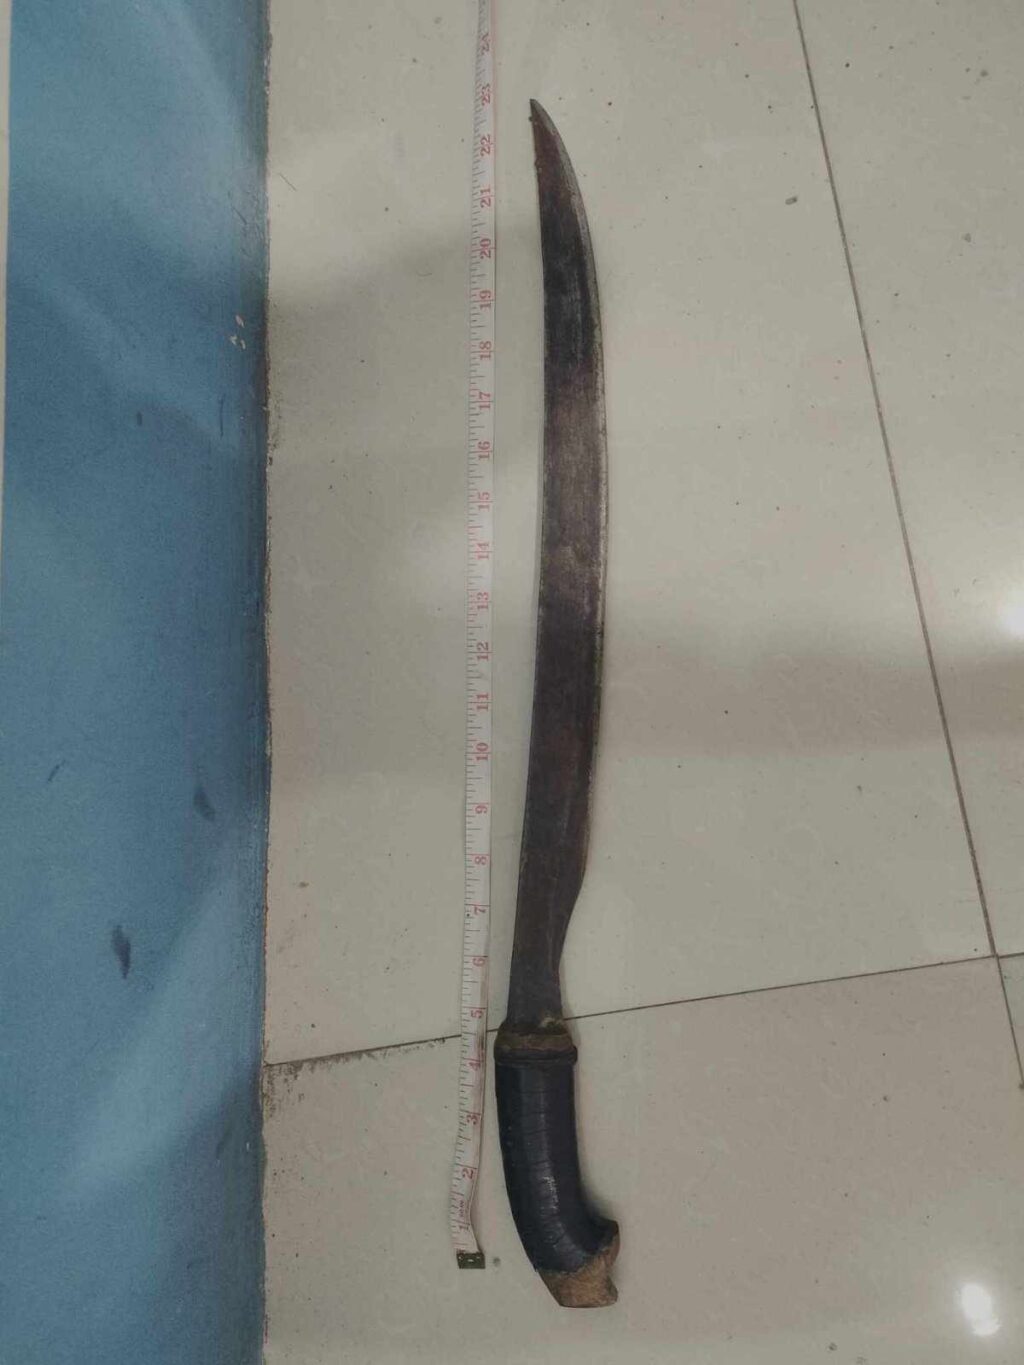 Lapu-Lapu killing: This is the bolo used in stabbing to death a construction worker on Sunday. | Lapu-Lapu City Police Office